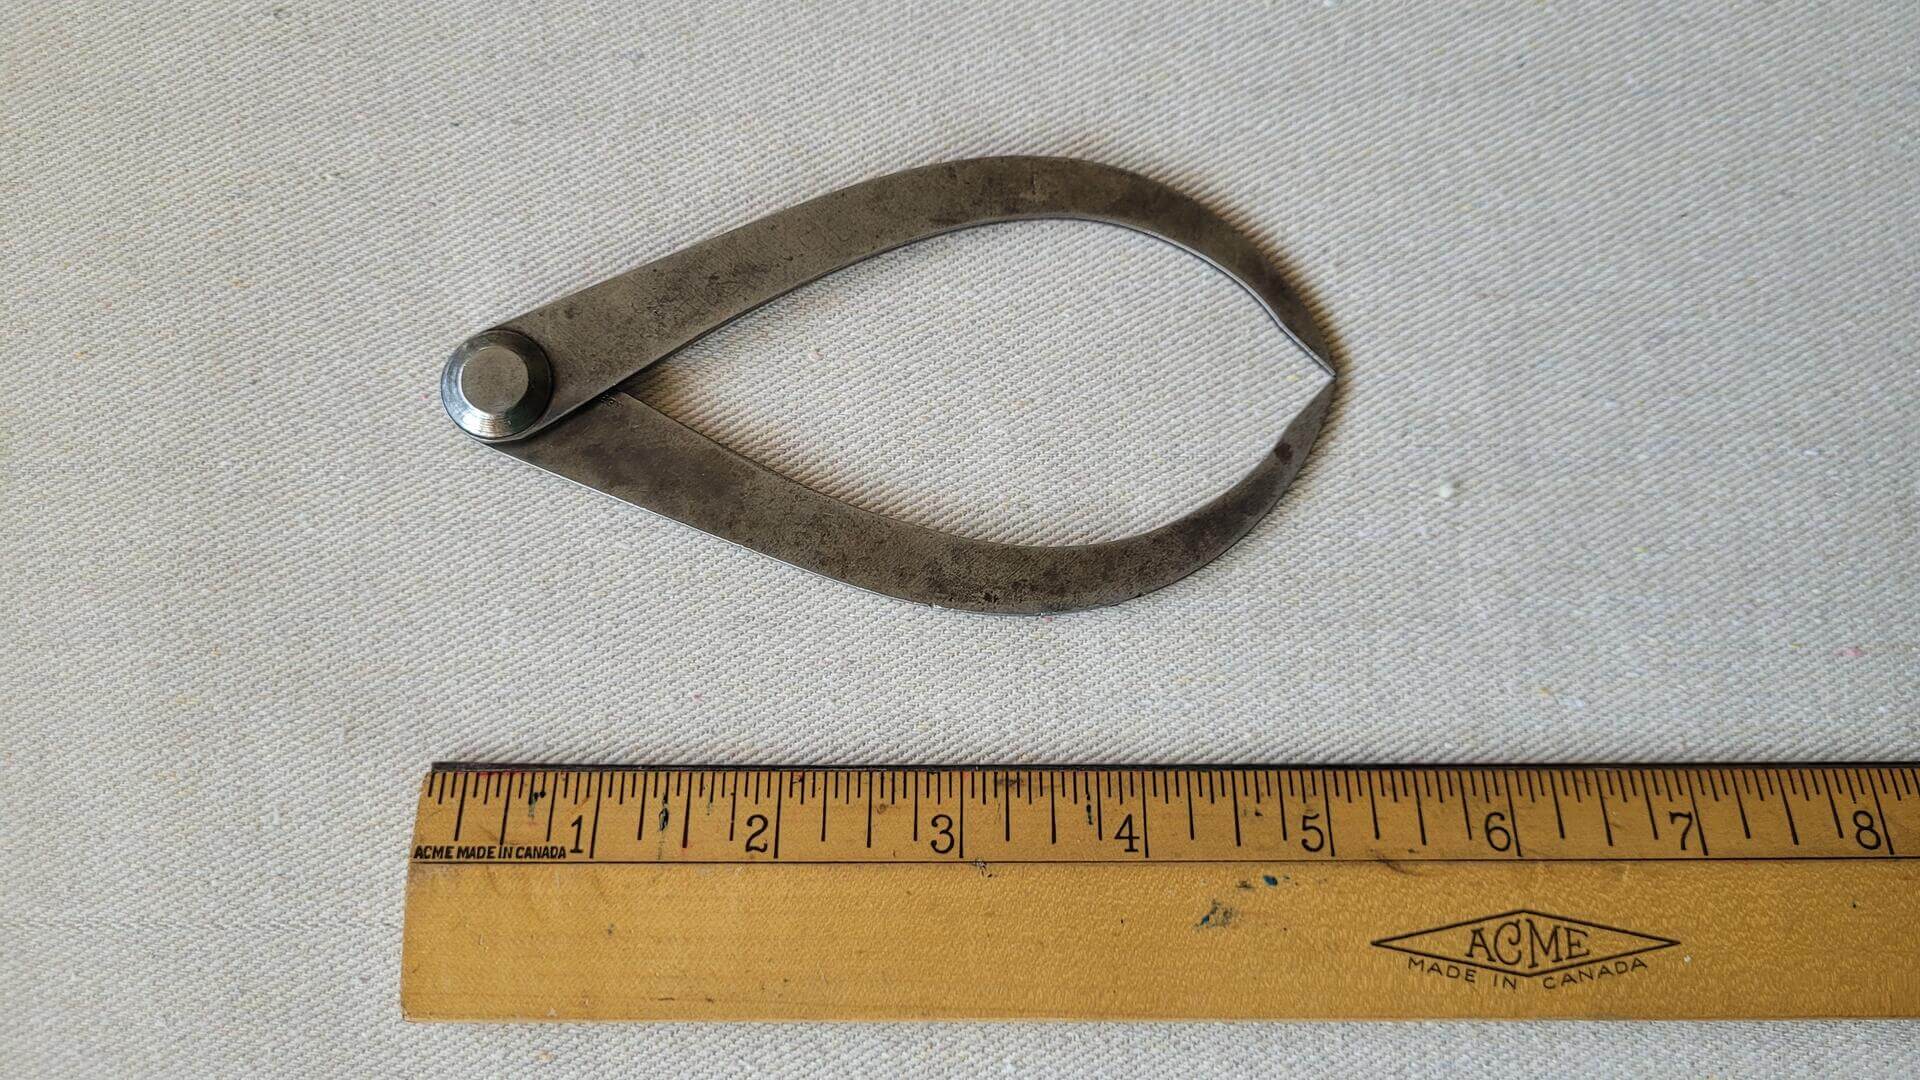 Antique Henry Boker firm joint outside caliper. Vintage made in Germany collectible carpentry and woodworking marking and measuring hand tools